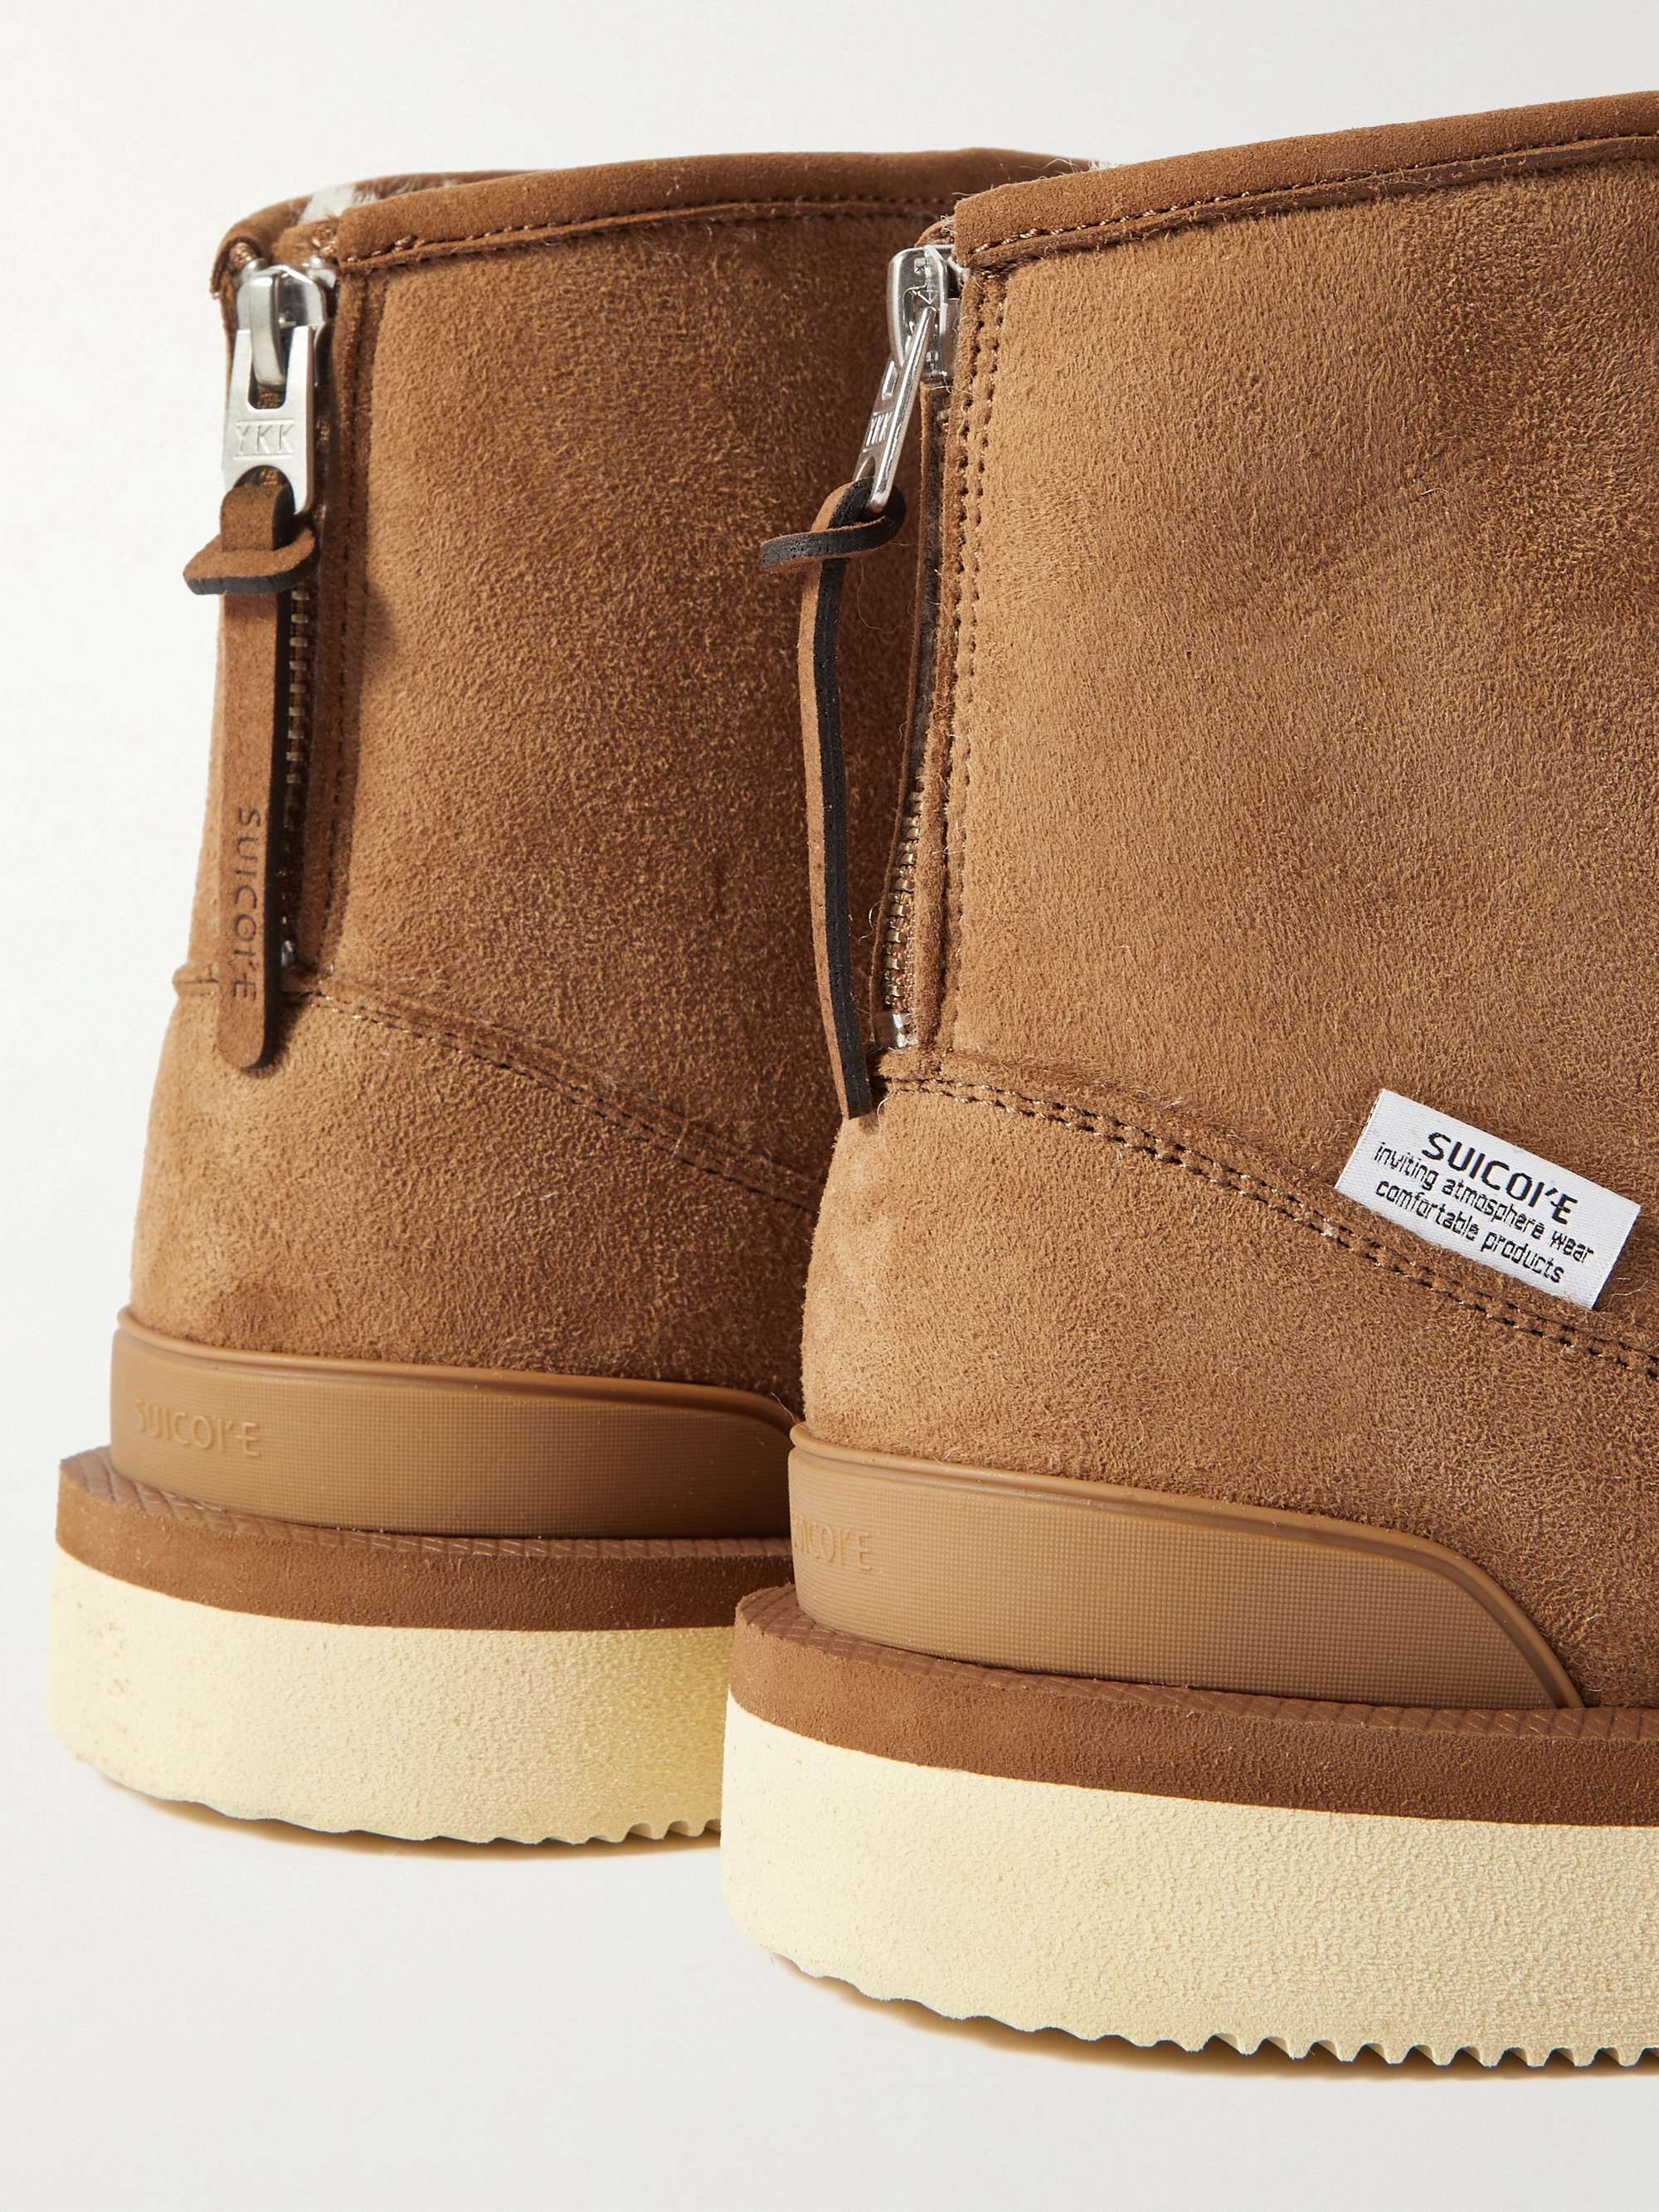 SUICOKE ELS-M2ab-MID Shearling-Lined Suede Boots